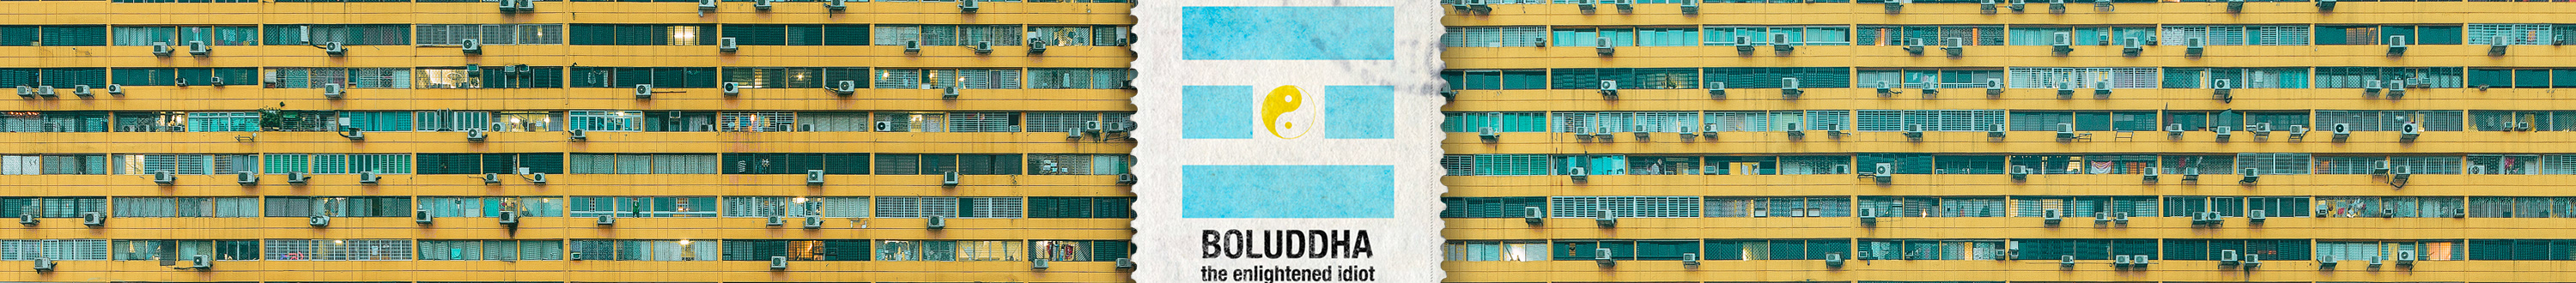 Boluddha - The Enlightened Idiot's profile banner